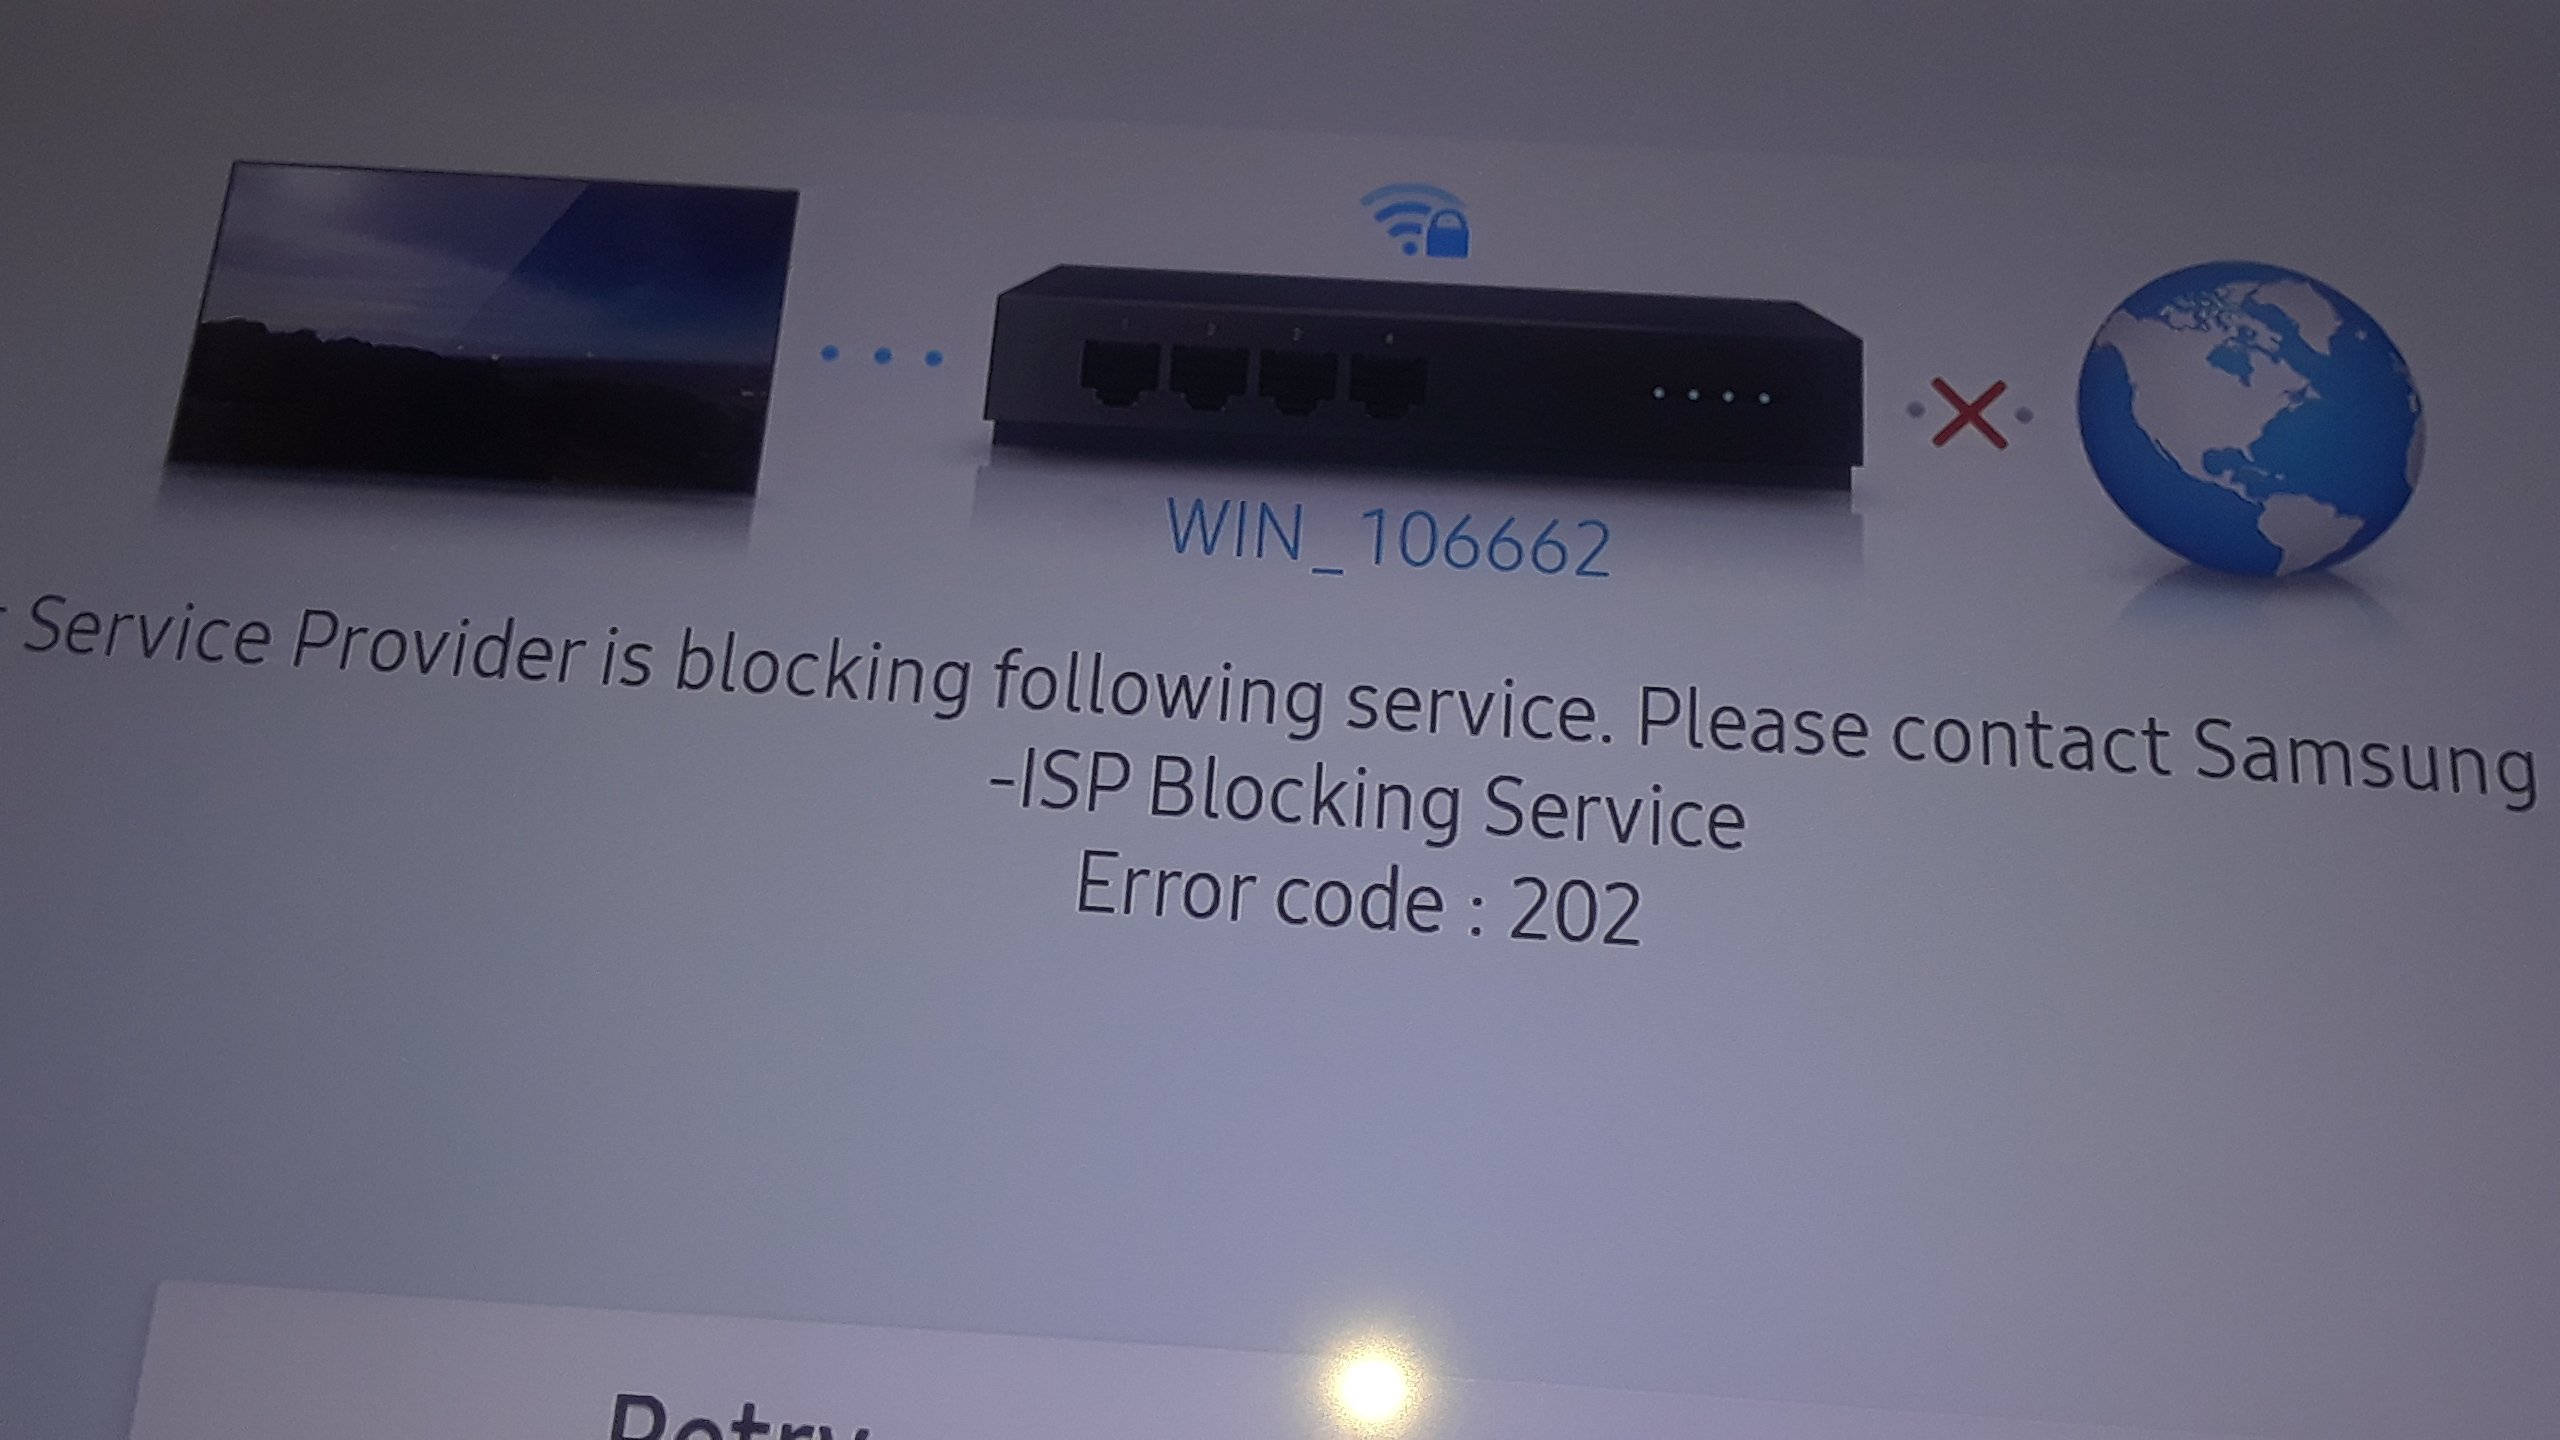 Don't Let Your Samsung TV Ruin Movie Night: The Real Scoop on Beating Don't Let Your Samsung TV Ruin Movie Night: The Real Scoop on Beating Error Code 202